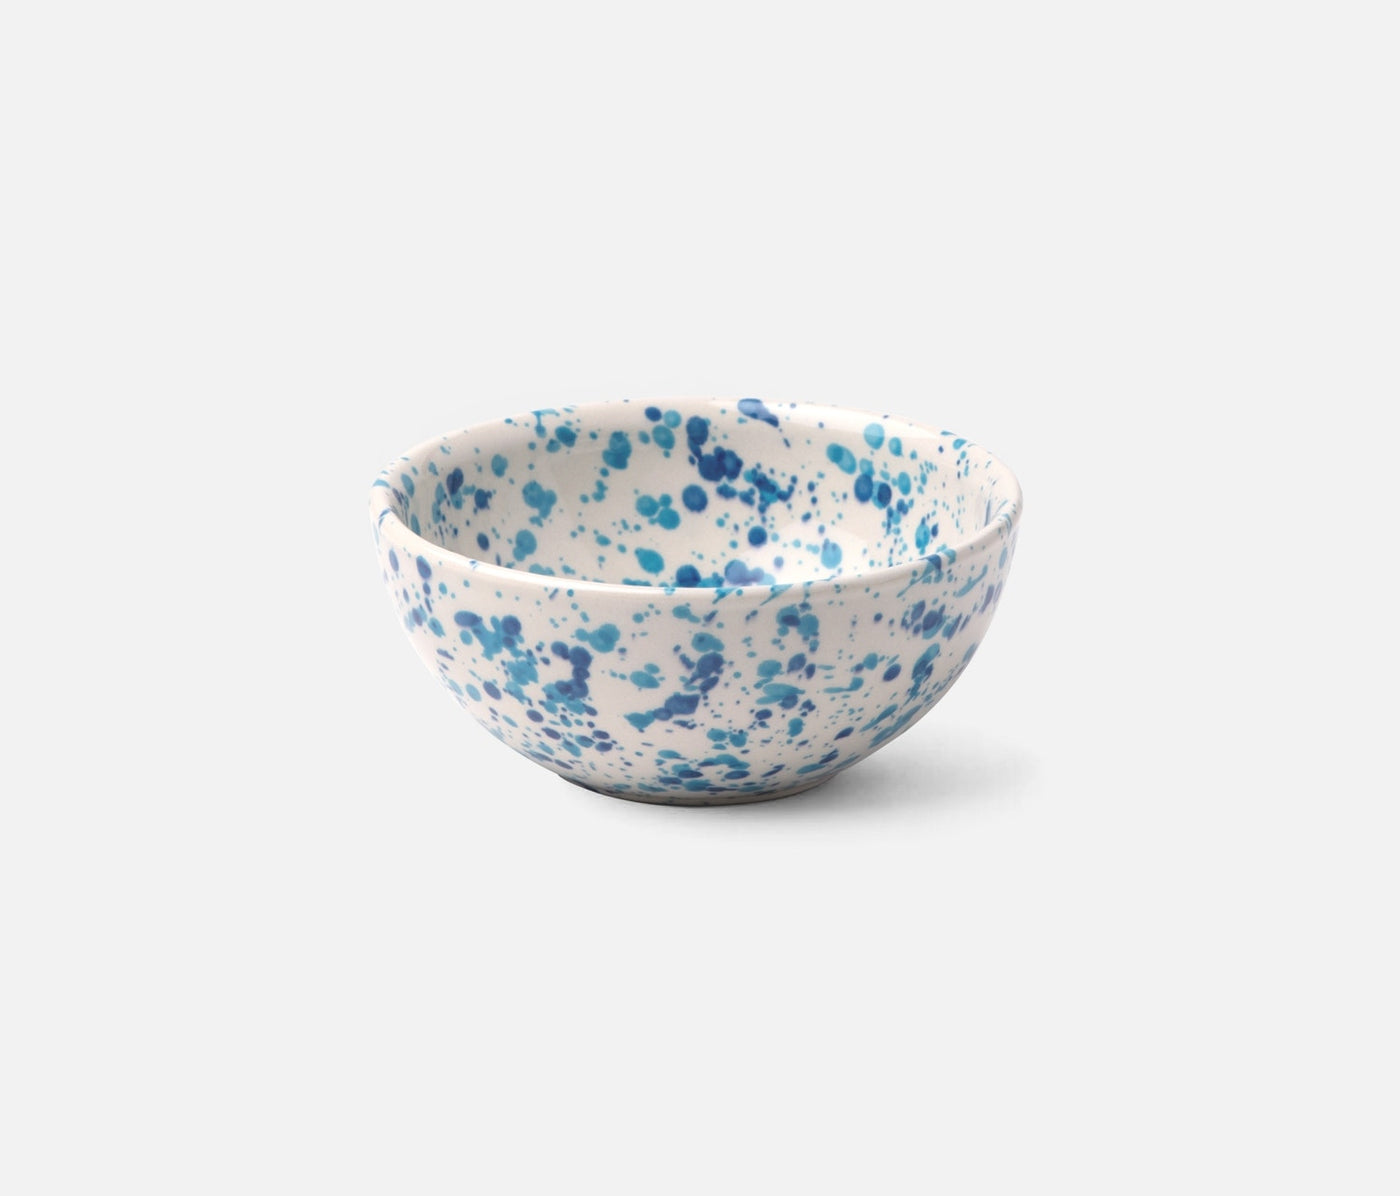 Sconset Cereal Bowl